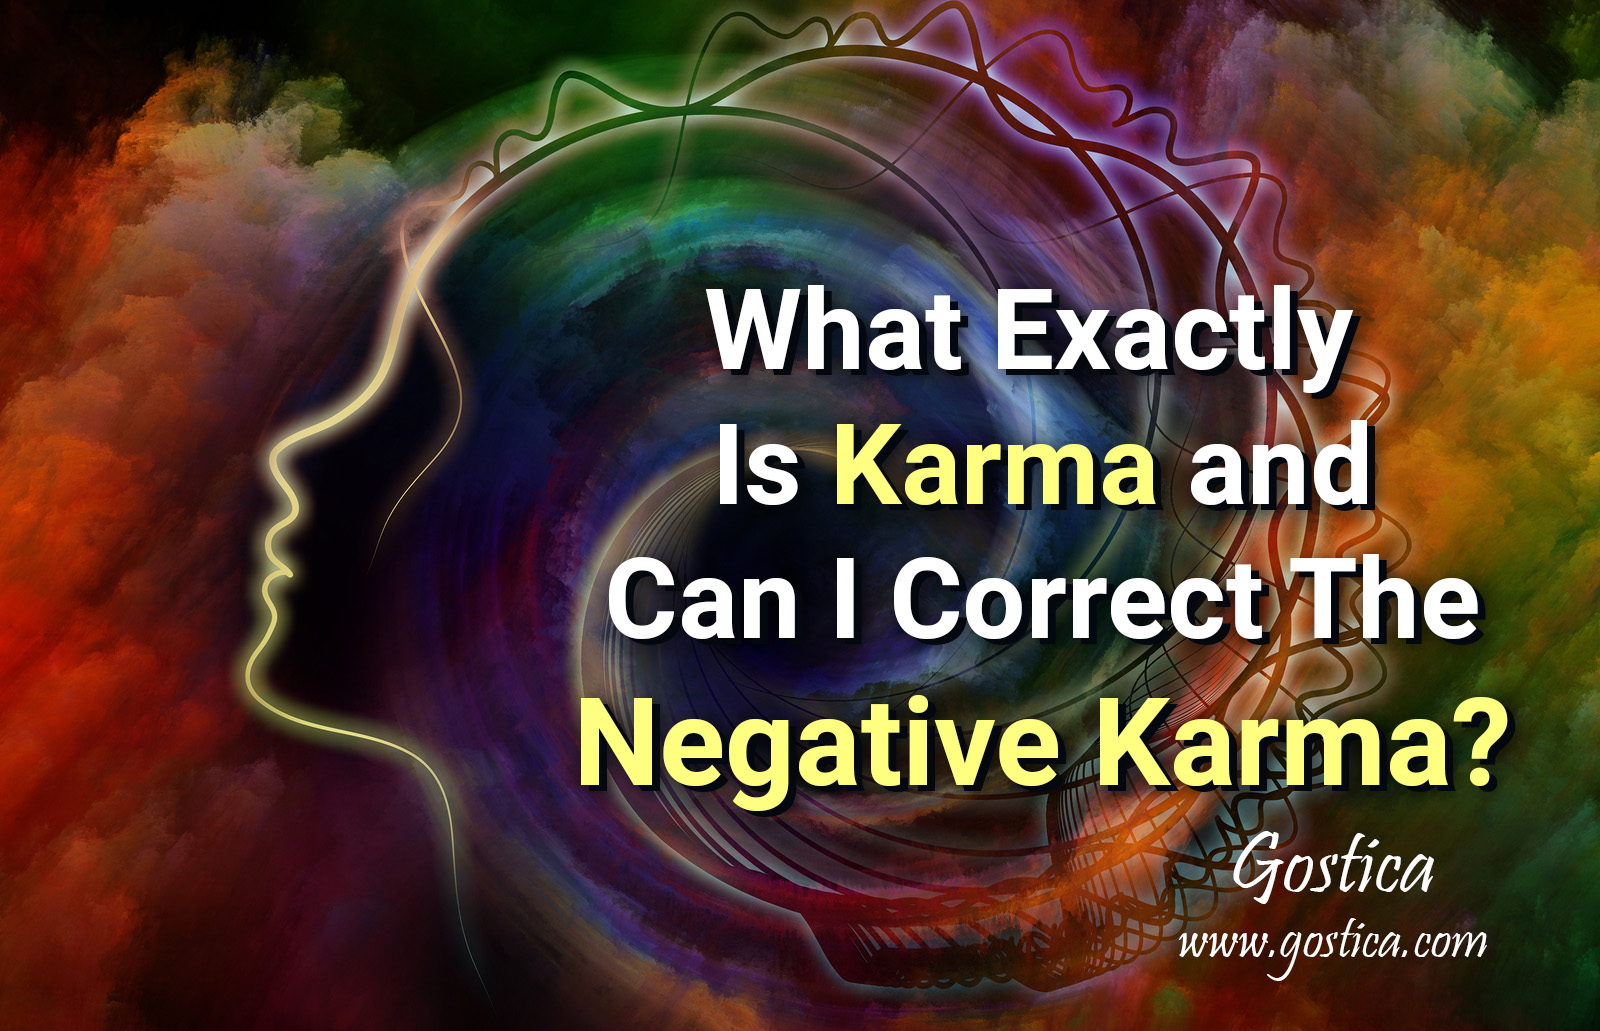 What-Exactly-Is-Karma-and-Can-I-Correct-The-Negative-Karma.jpg